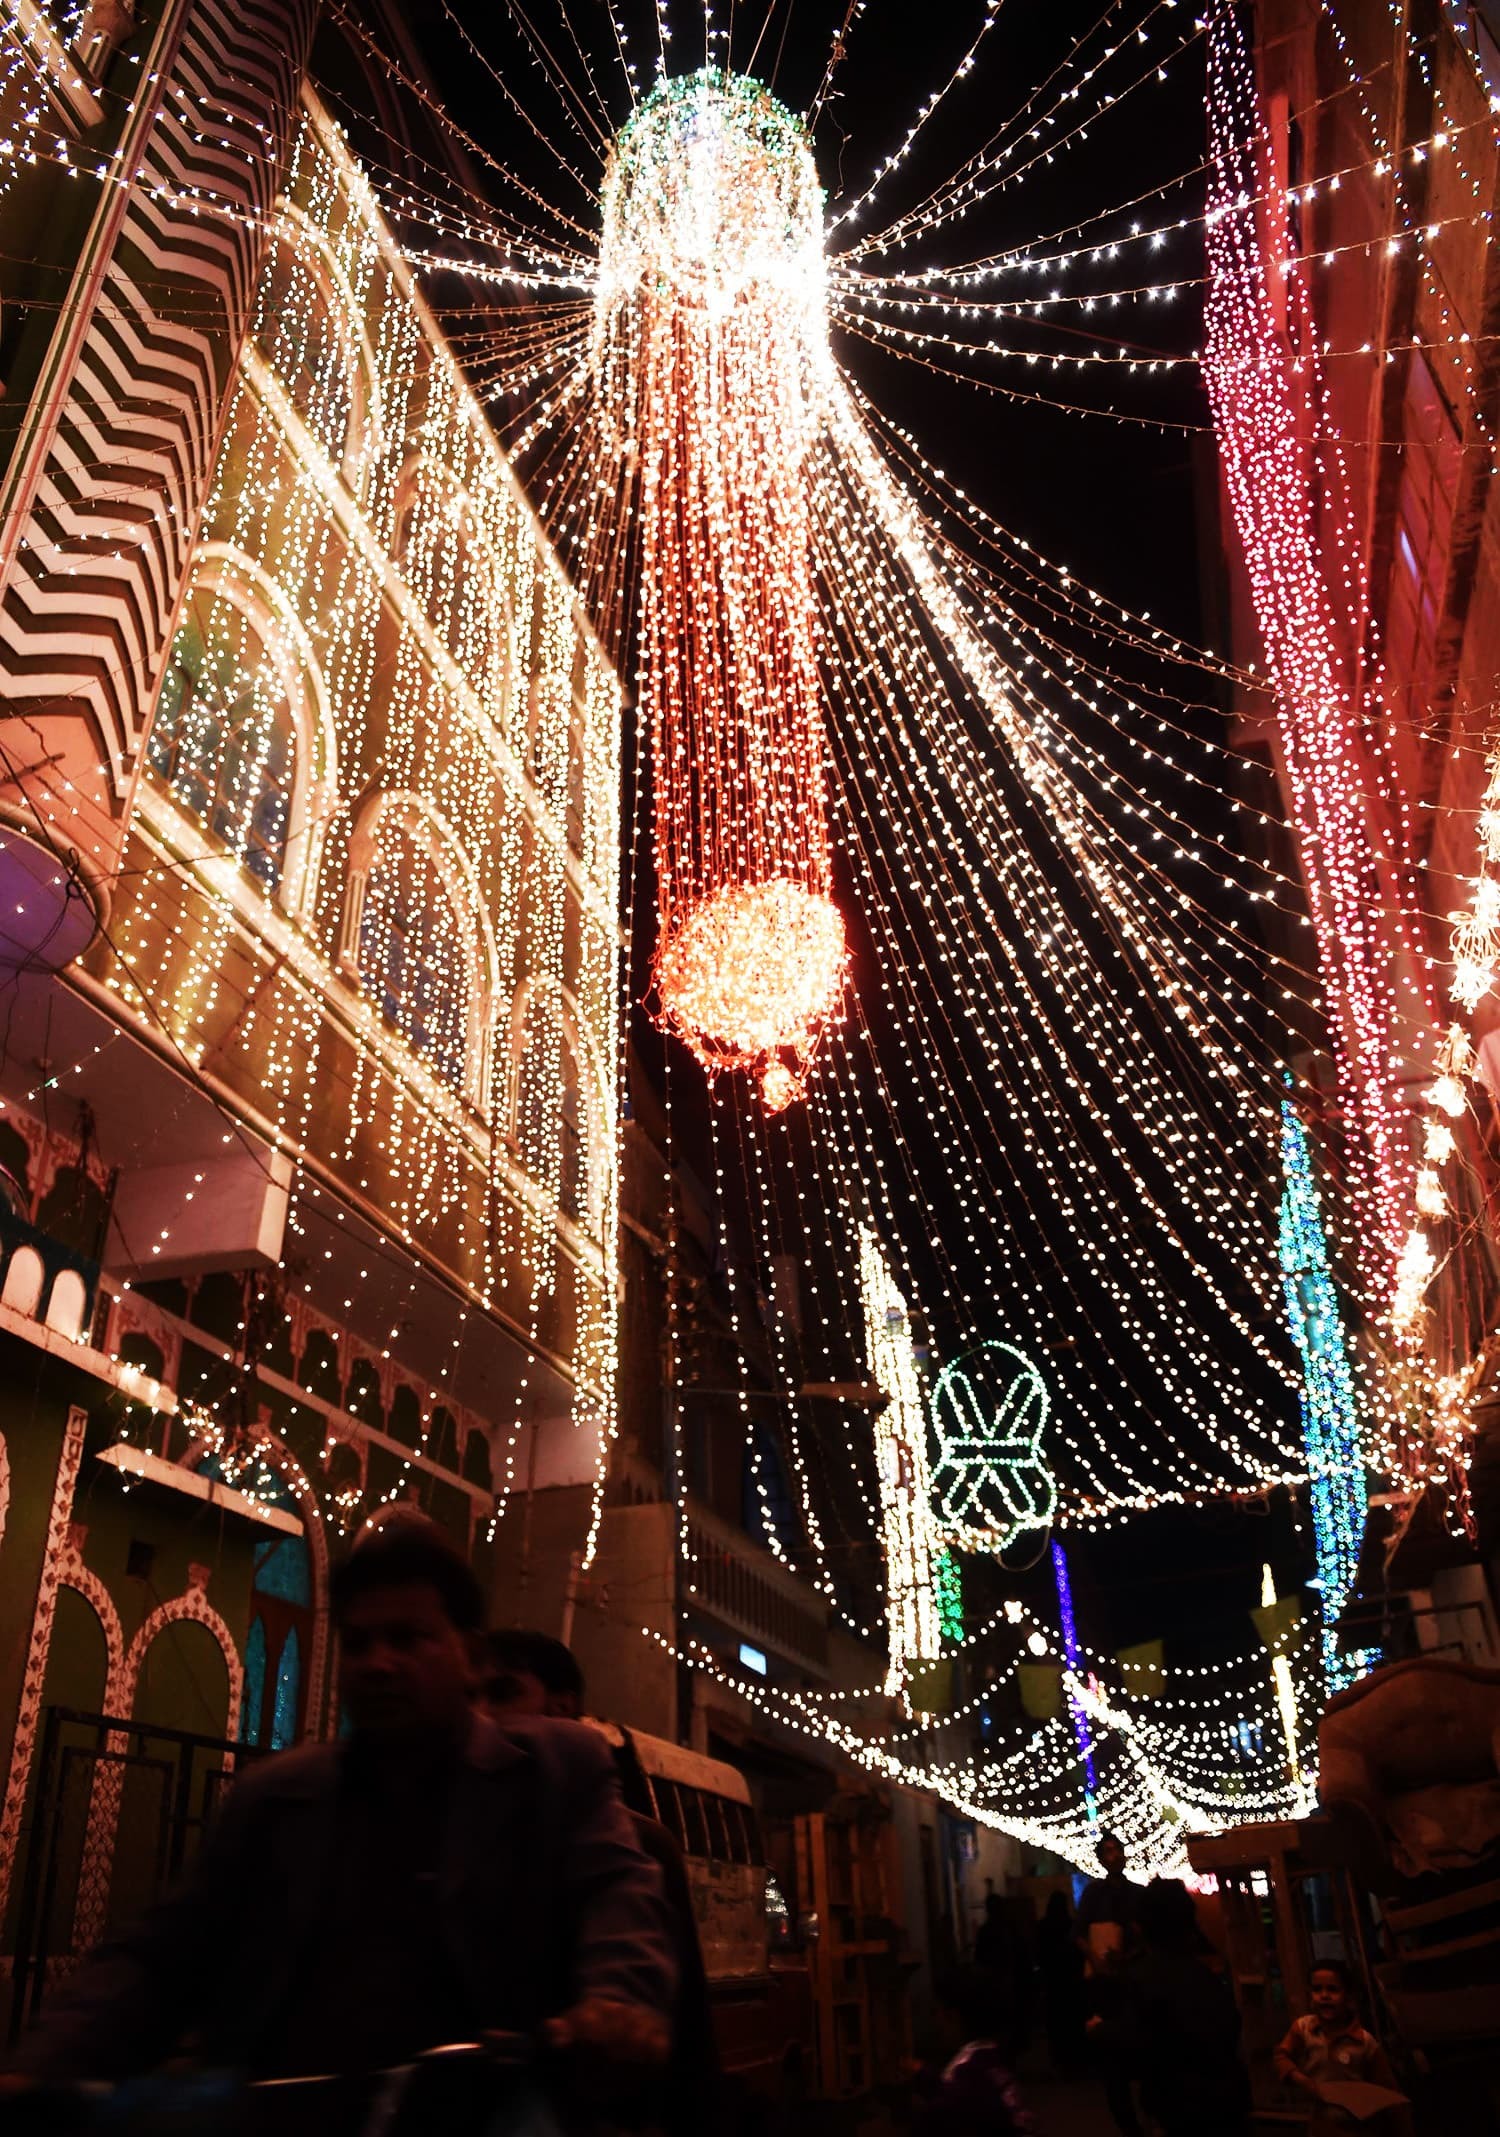 Pakistani men ride past a mosque decorated to celebrate the birthday of Prophet Mohammed in Karachi on December 23, 2015. The birthday of Prophet Mohammed, also known as 'Milad', is celebrated during the Islamic month of Rabi al-Awwal, which falls on December 24, 2015 in Pakistan. AFP PHOTO / Rizwan TABASSUM